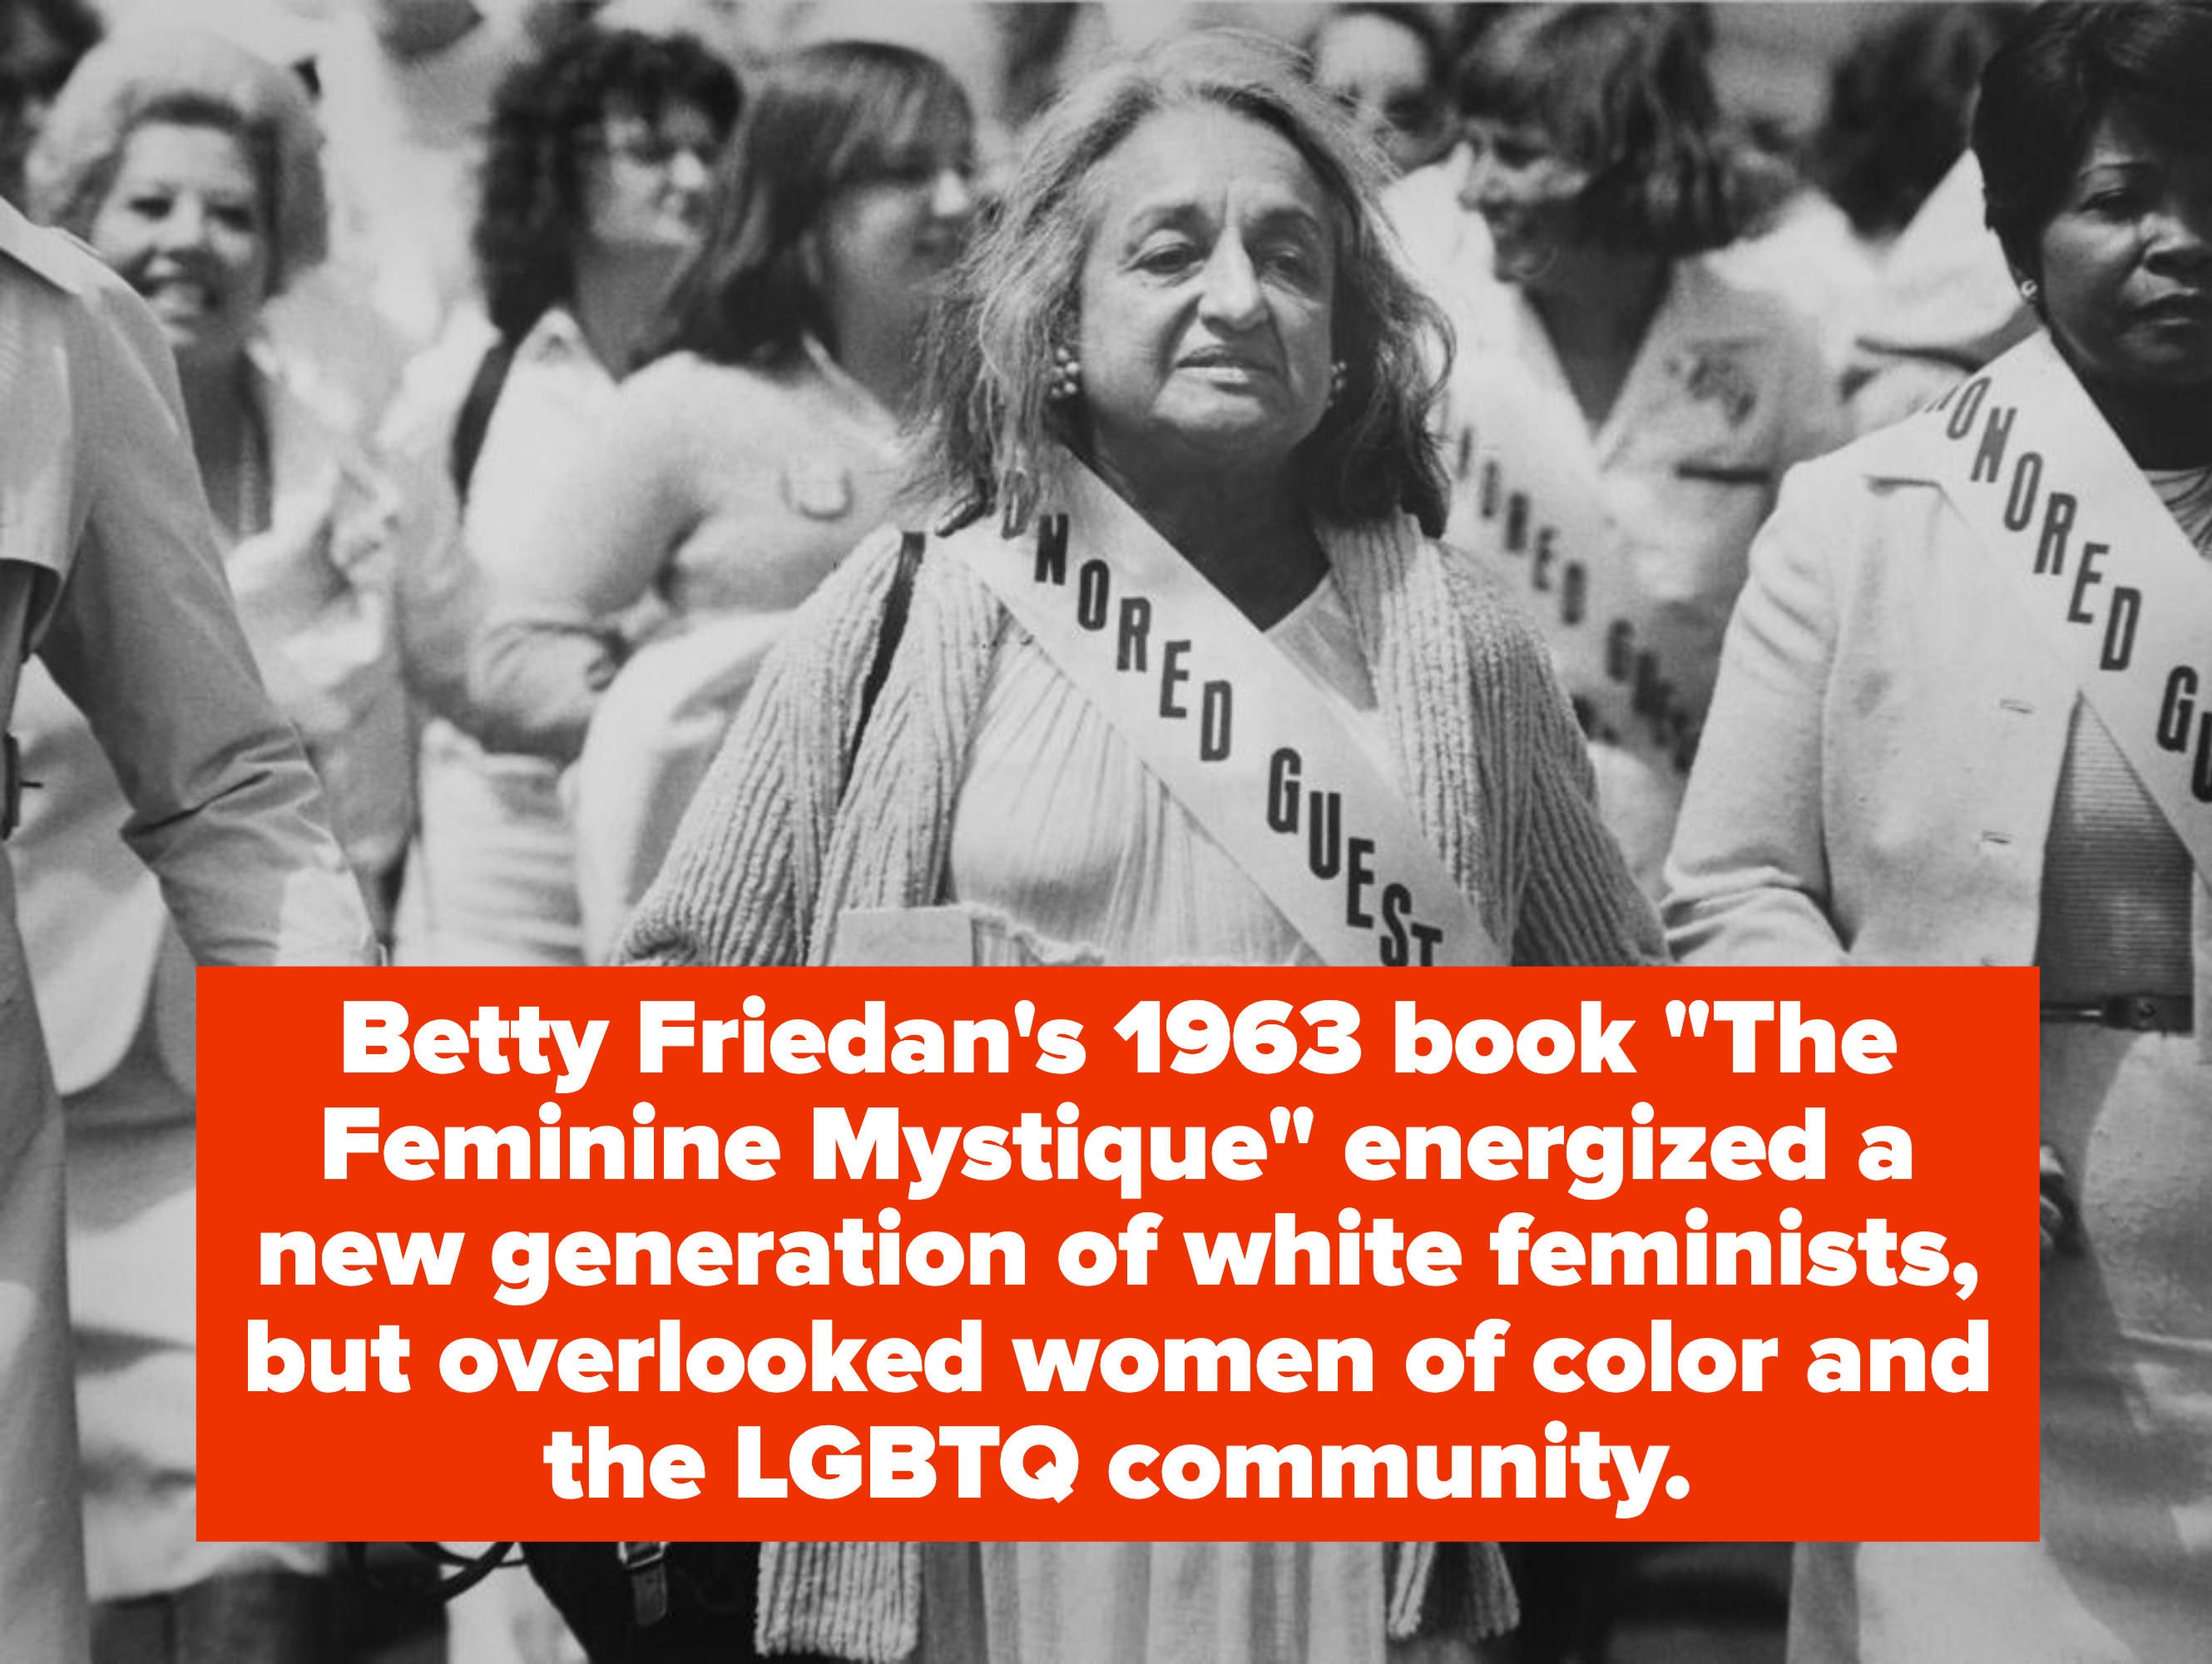 Betty Friedan&#x27;s 1963 book The Feminine Mystique energized a new generation of white feminists, but overlooked the lives and experiences of women of color and the LGBTQ community.